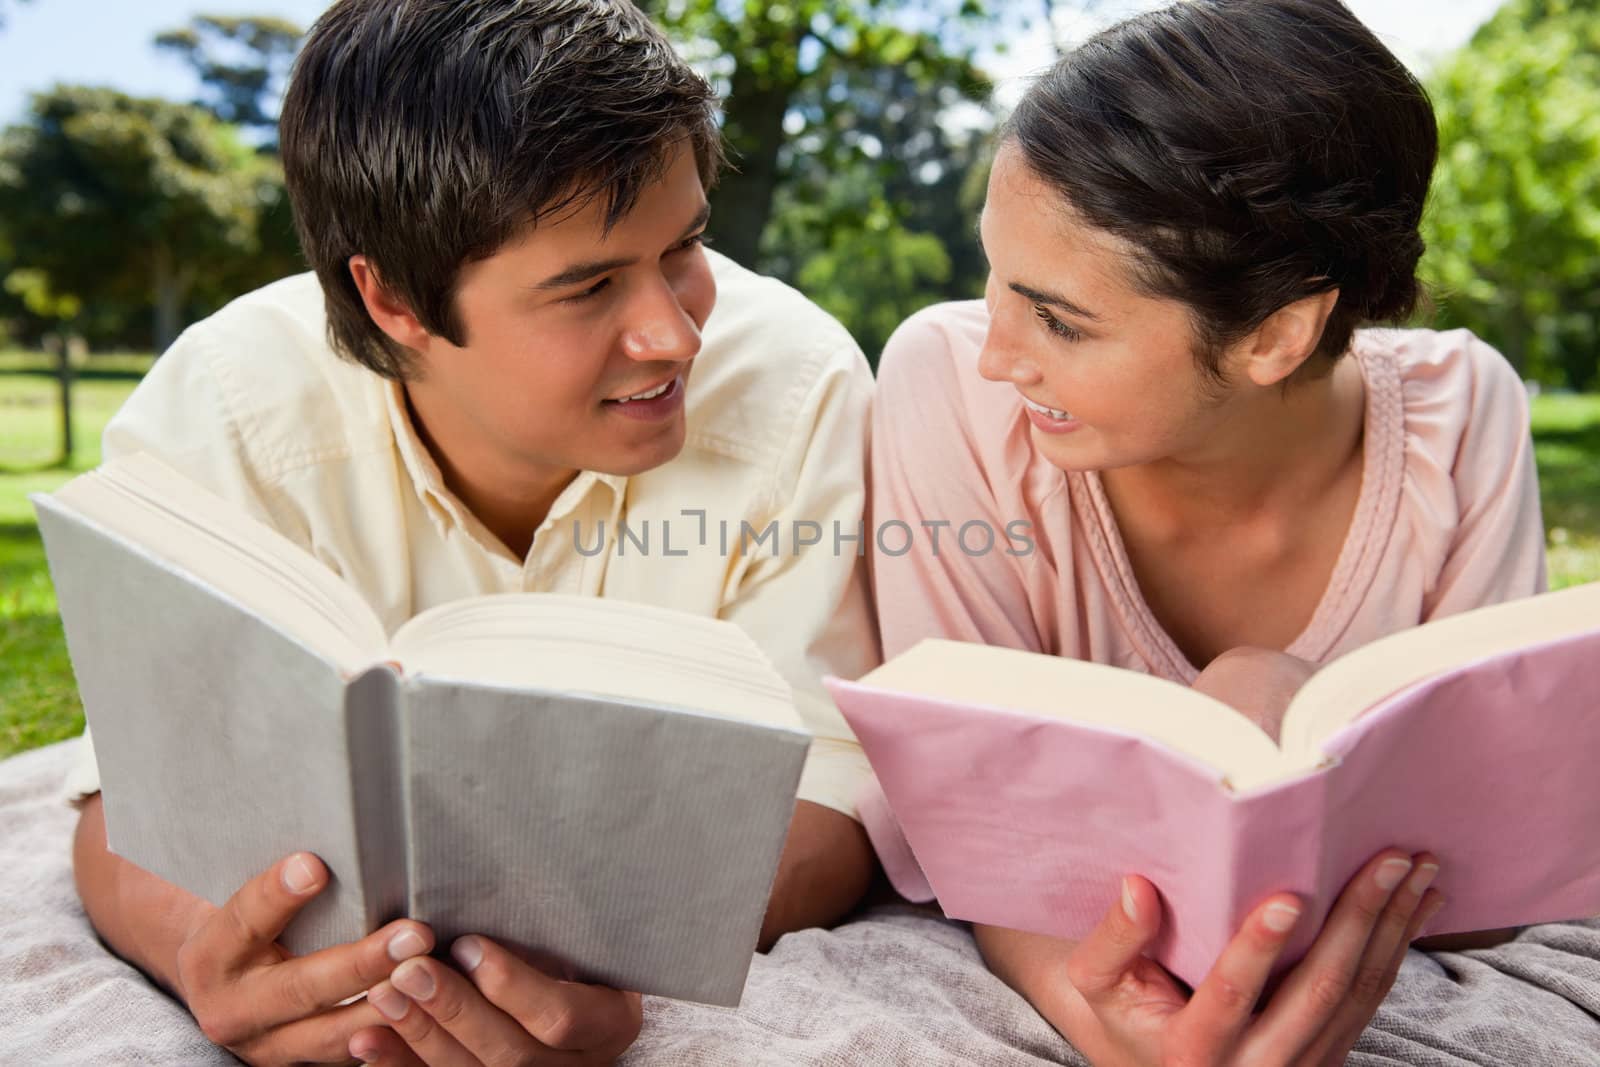 Man and a woman smiling at each other while reading books as they lie prone on a grey blanket in the grass